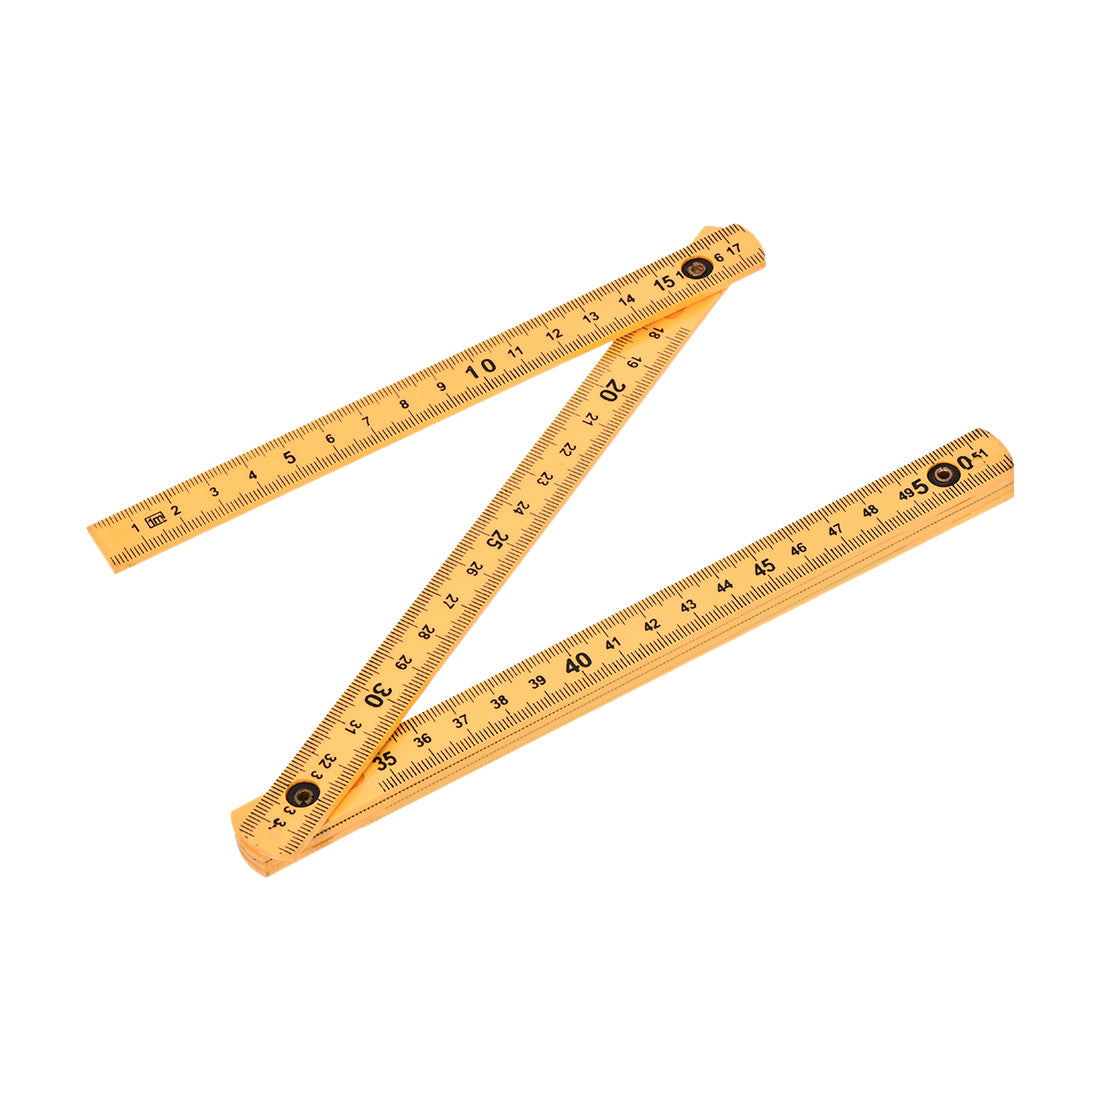 uxcell Uxcell Folding Ruler 100cm 6 Fold Metric Measuring Tool ABS for Woodworking Engineer Yellow